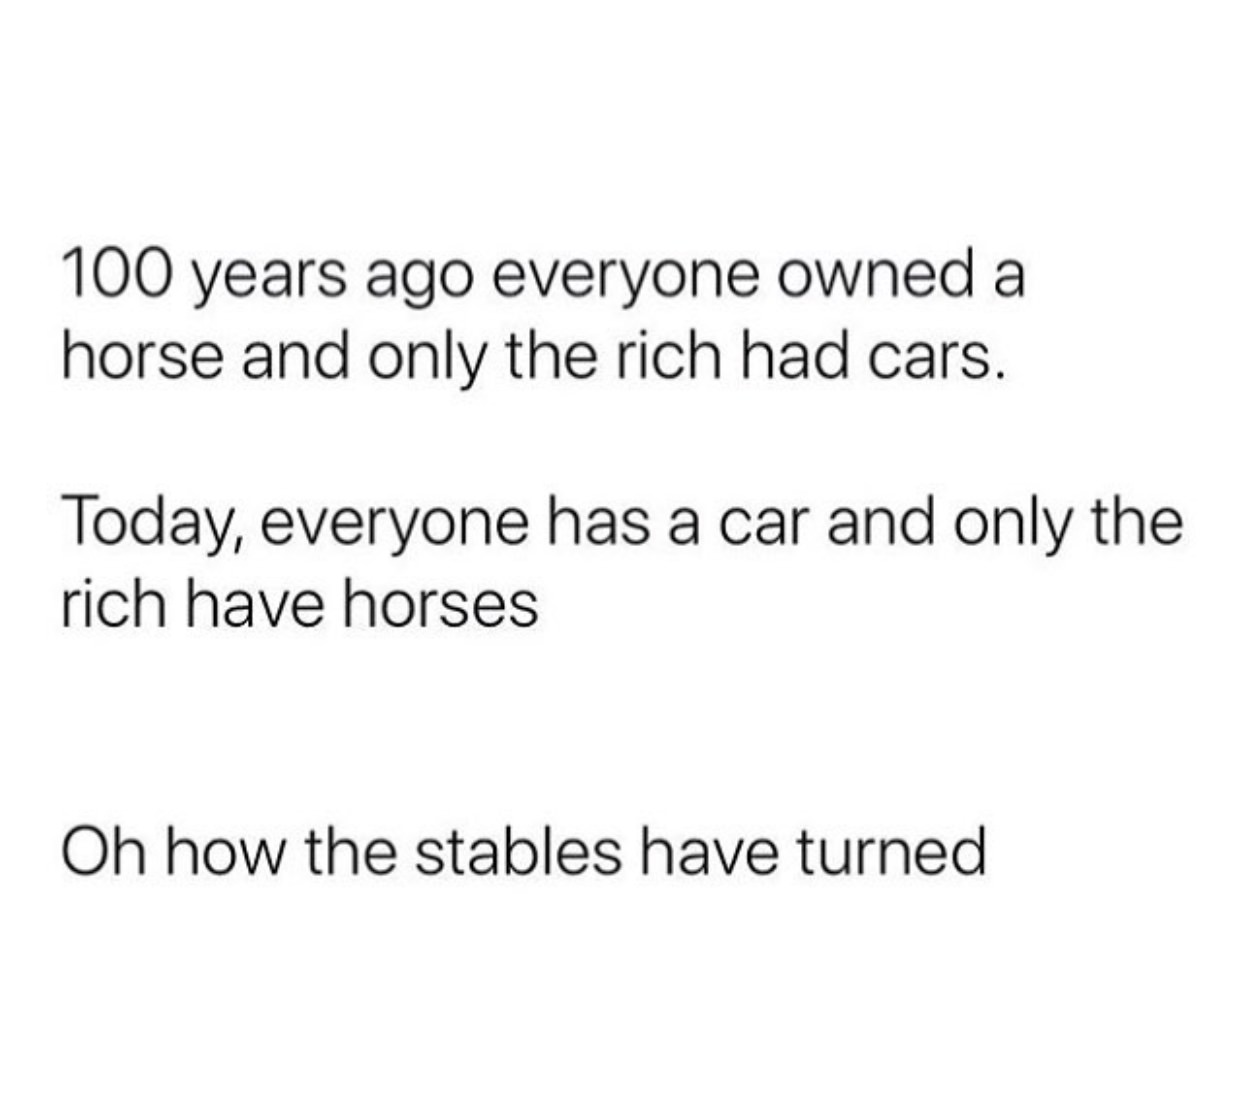 Fun meme about how 100 years ago everyone owned a horse and only the rich had cars and now everyone has a car and only the rich have horses